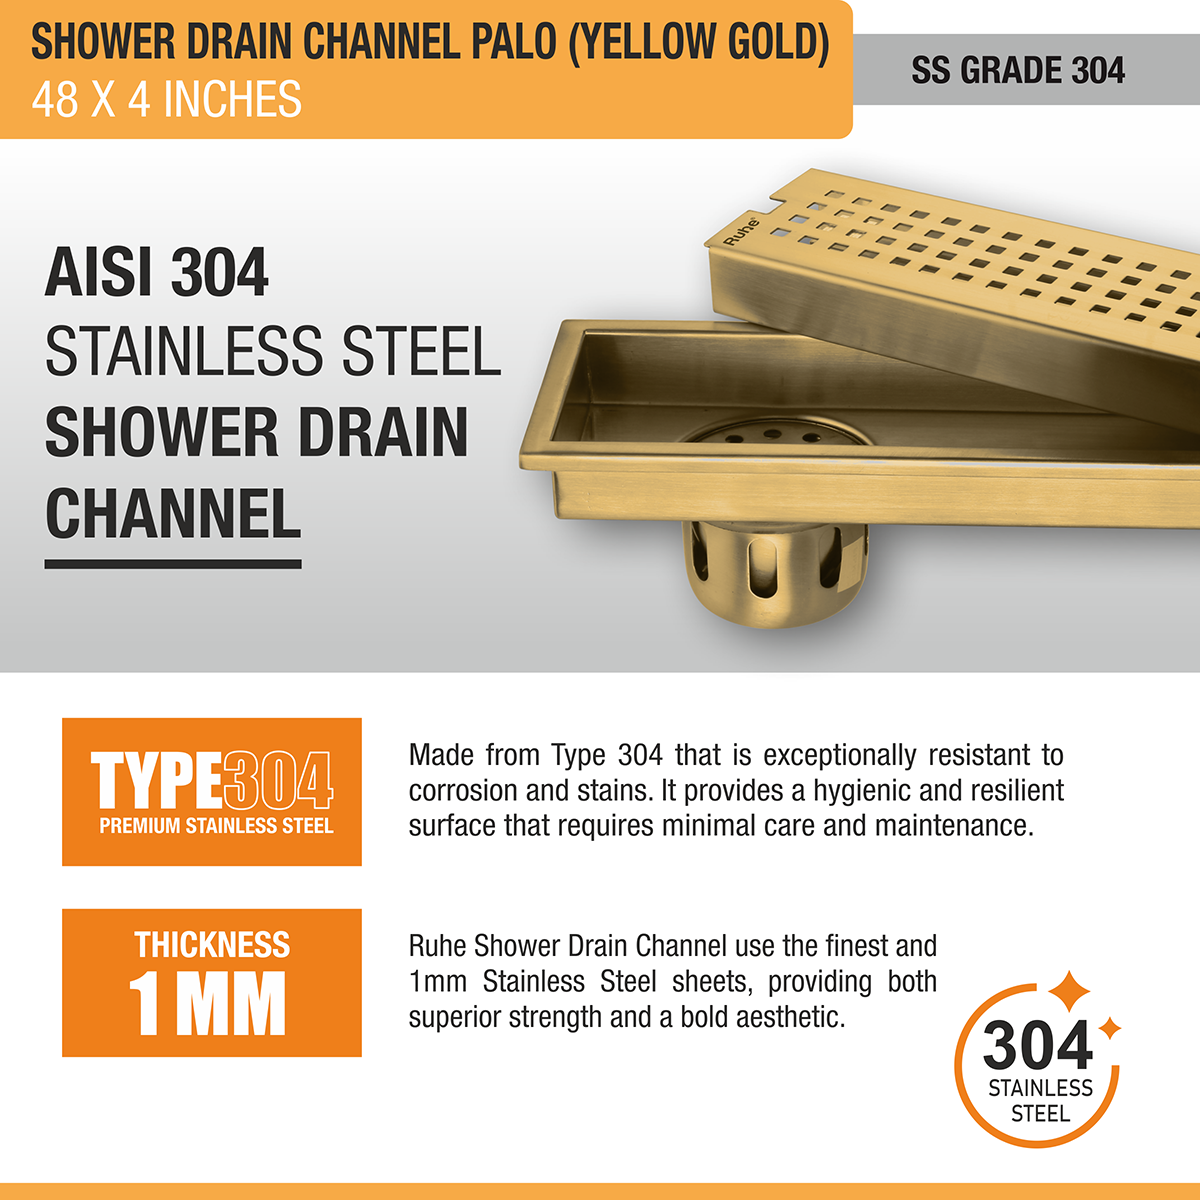 Palo Shower Drain Channel (48 x 4 Inches) YELLOW GOLD stainless steel